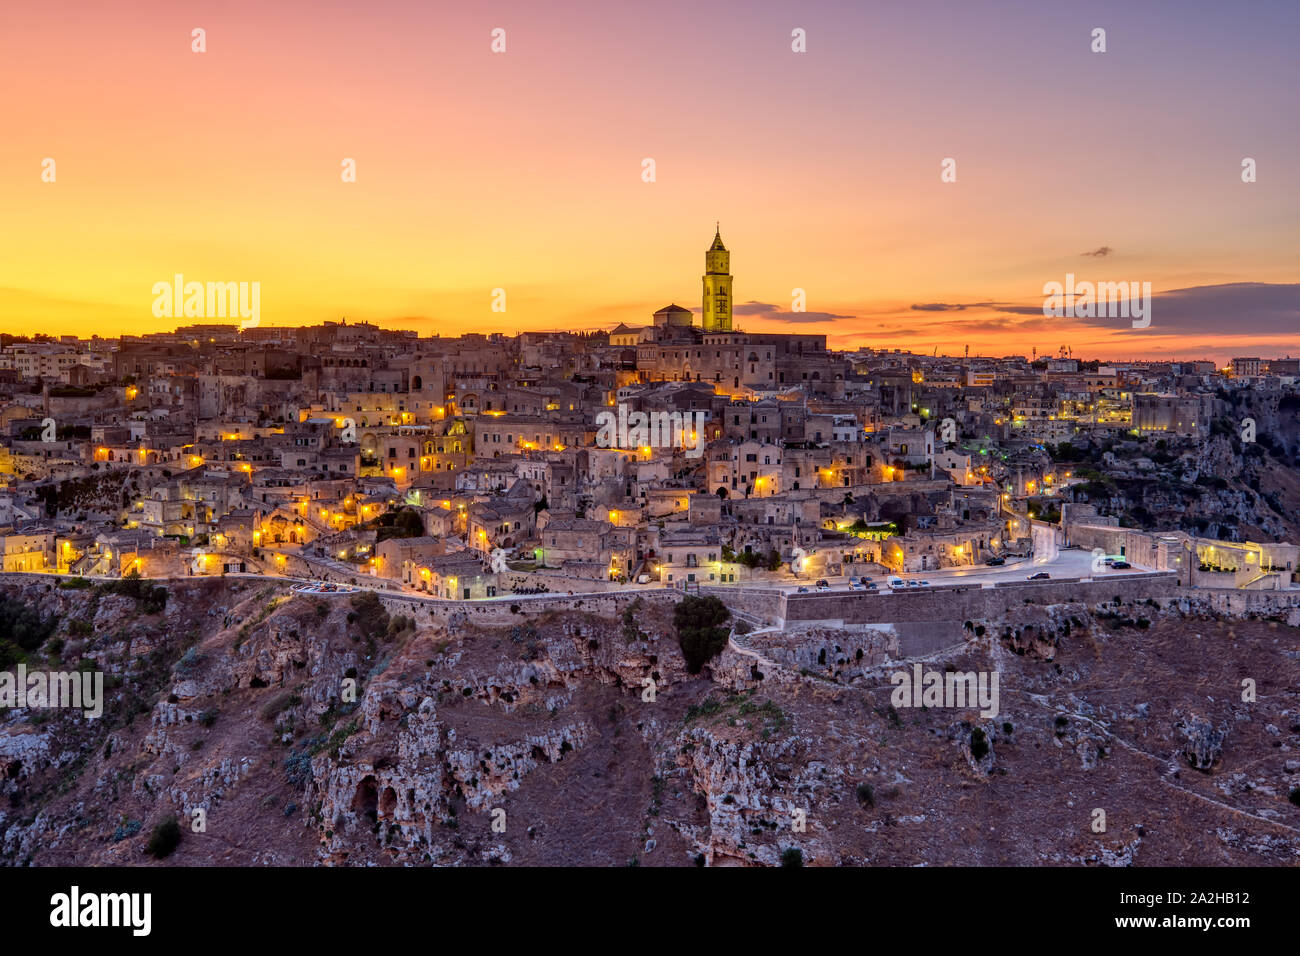 View of the beautiful old town of Matera in southern Italy after sunset Stock Photo